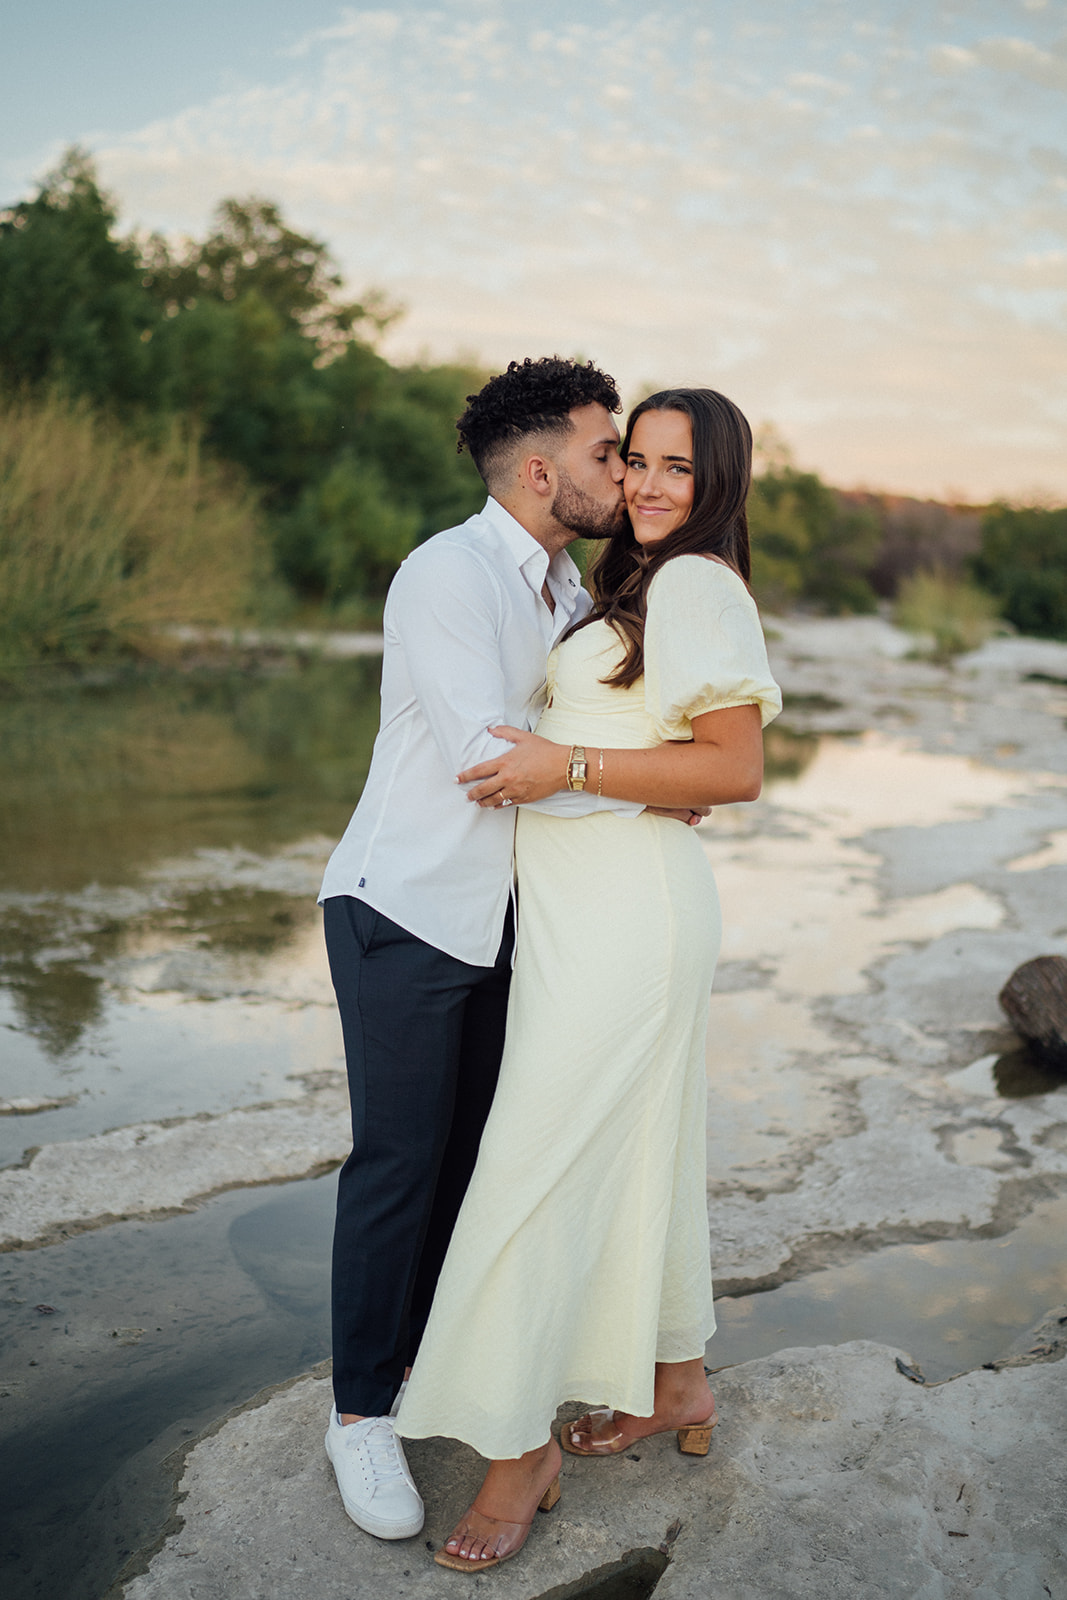 Taryn and Gavin embracing during their engagement session at McKinney Falls